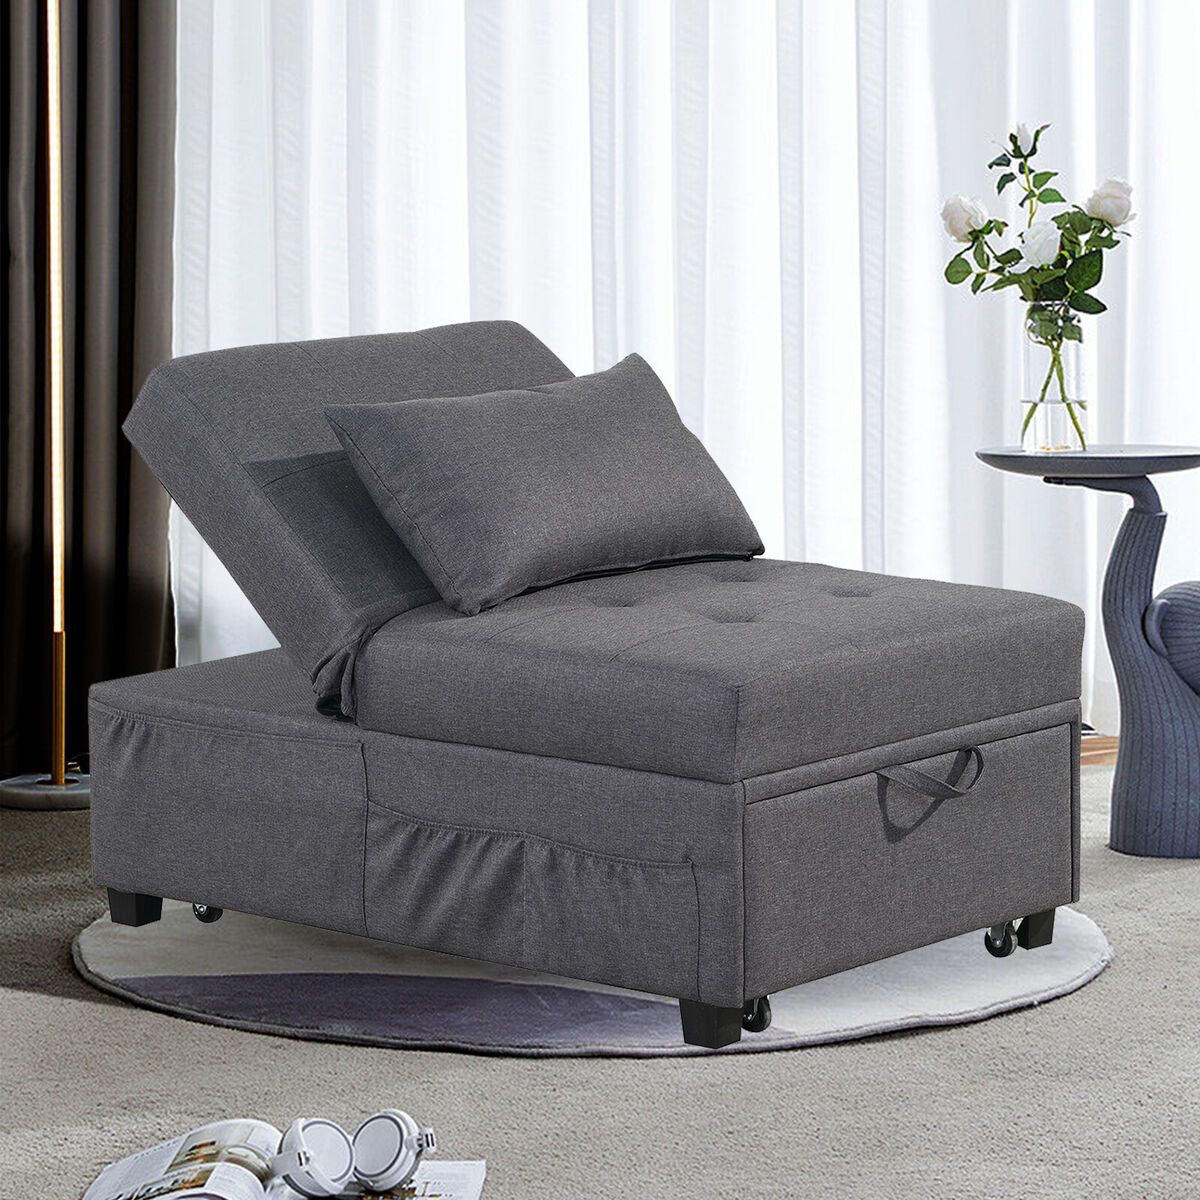 4 In 1 Convertible Sofa Bed Folding Sleeper Chair Leisure Recliner Lounge  Couch | Ebay Intended For 4 In 1 Convertible Sleeper Chair Beds (View 14 of 15)